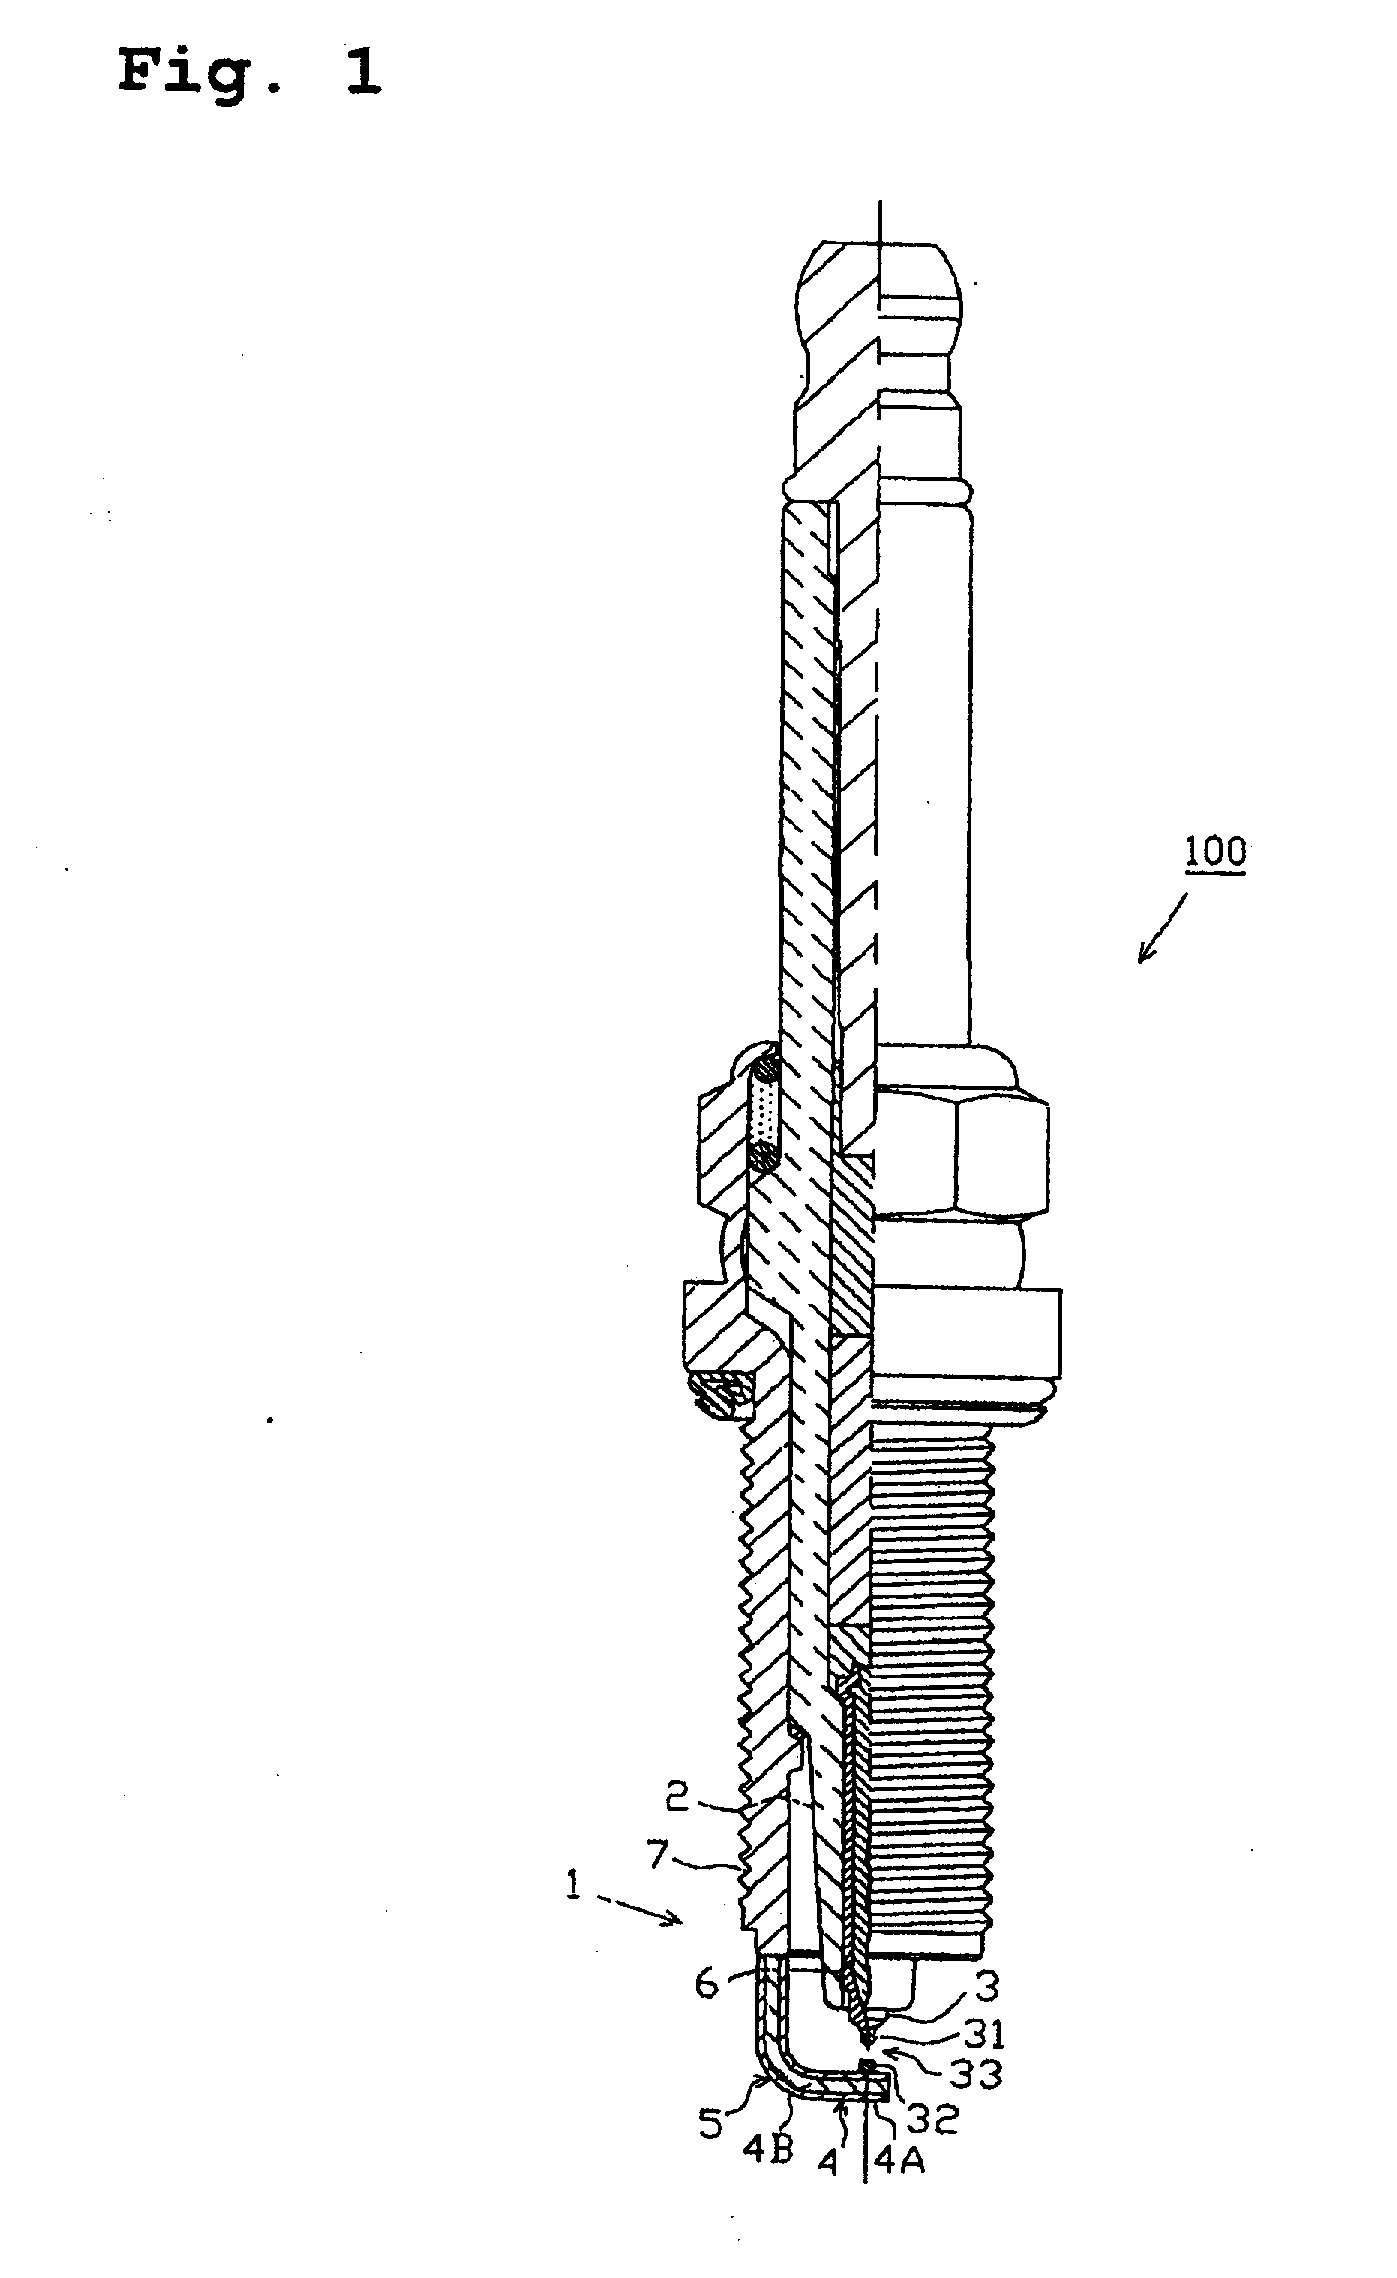 Spark plug for use in an internal-combustion engine